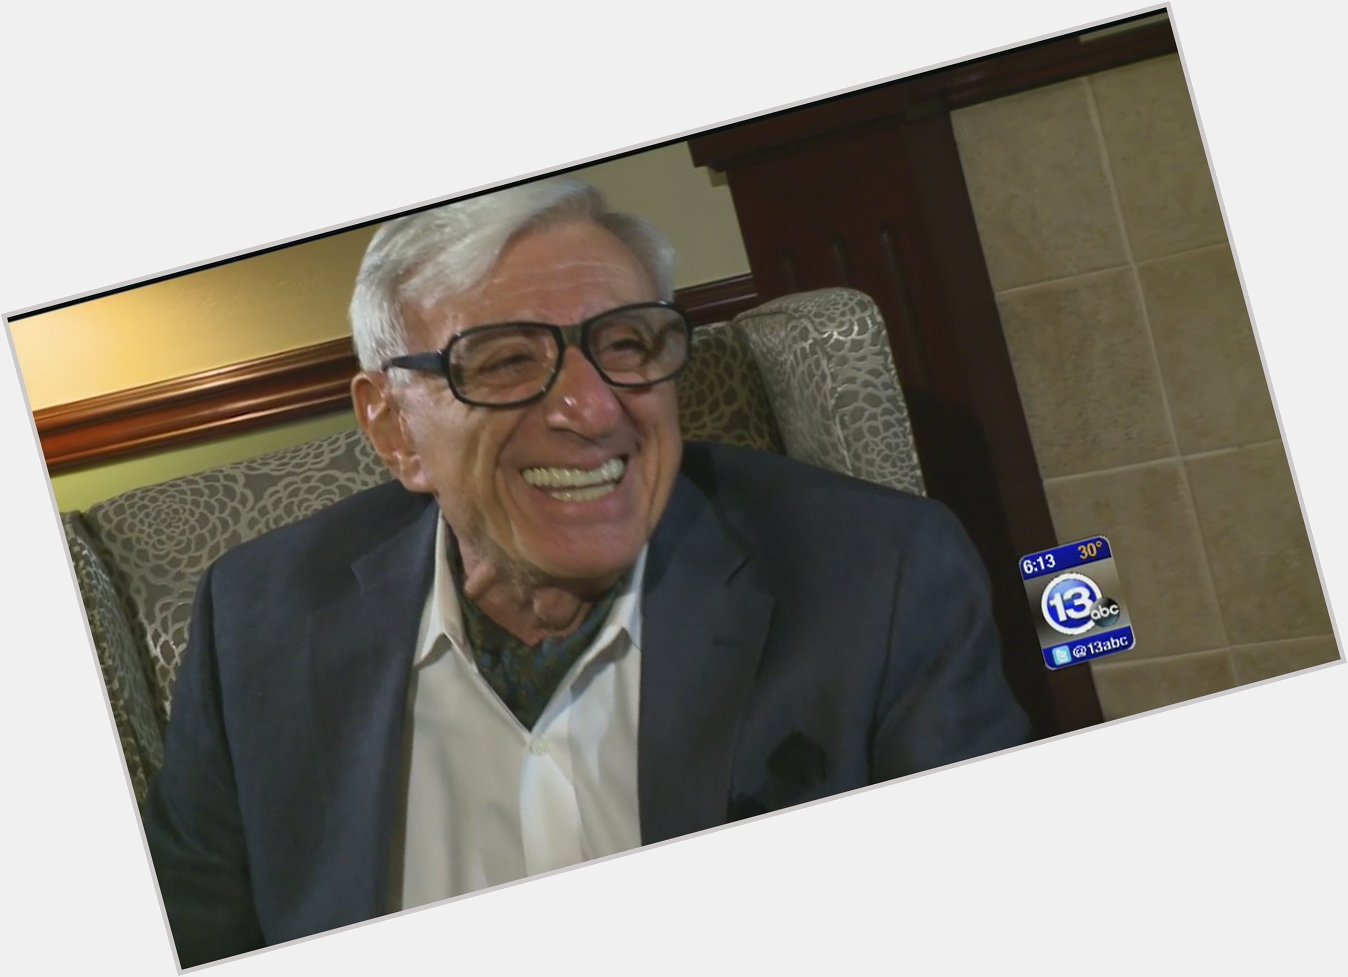 Join us in wishing Toledo native and actor Jamie Farr a happy birthday! He\s 88-years-old today 